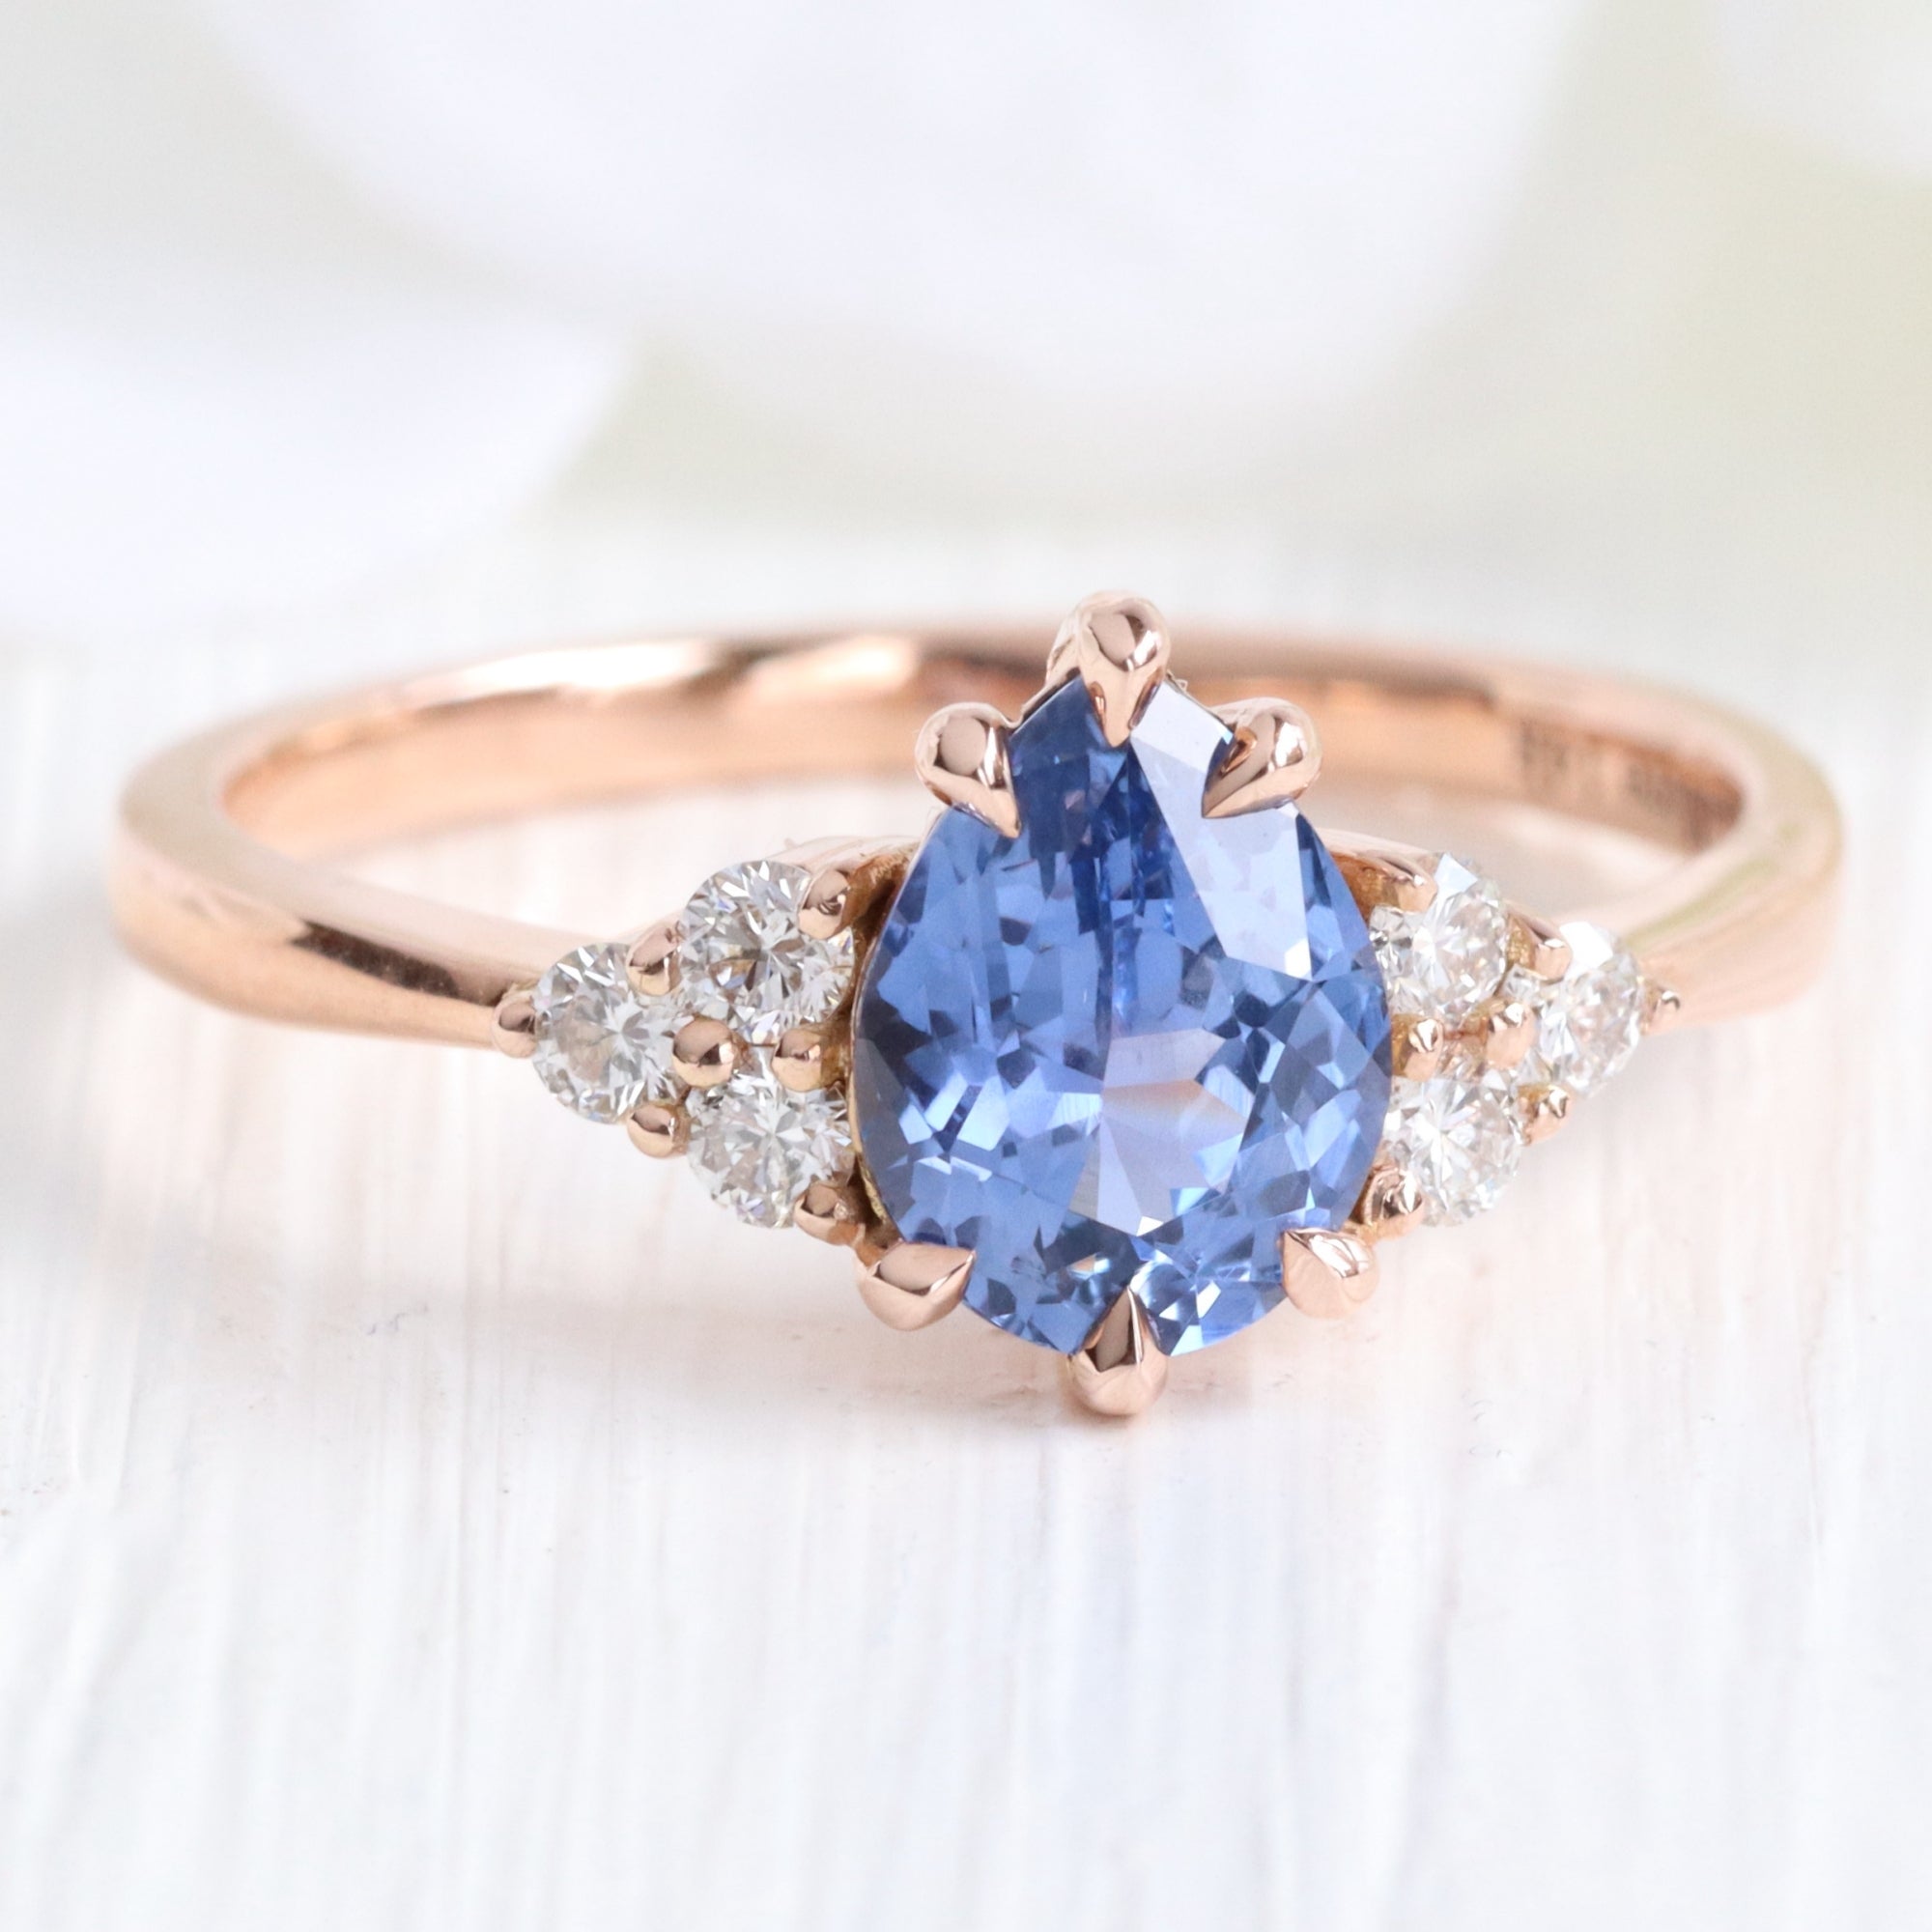 Opalescent sapphire ring | PriceScope